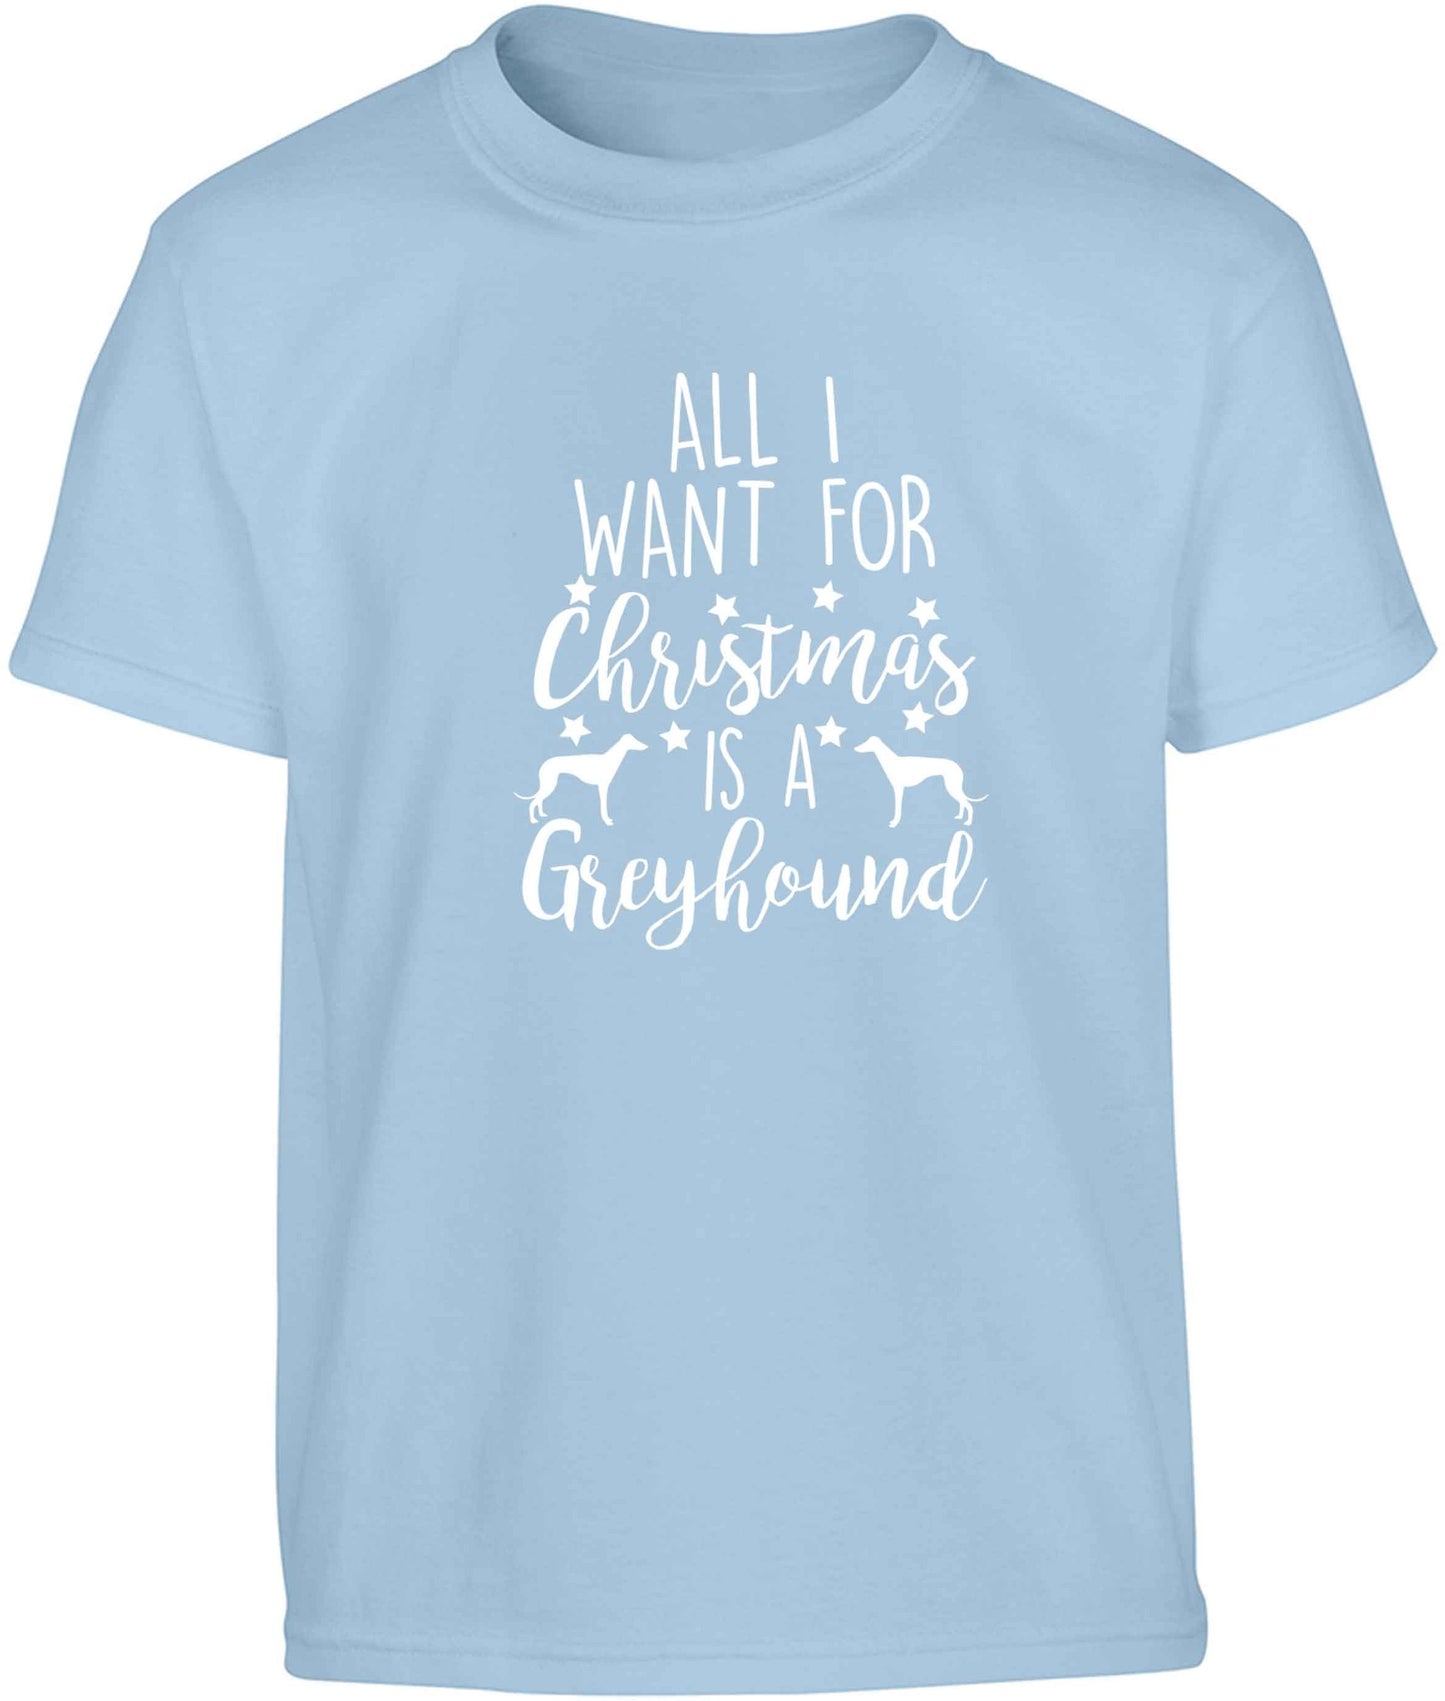 All I want for Christmas is a greyhound Children's light blue Tshirt 12-13 Years